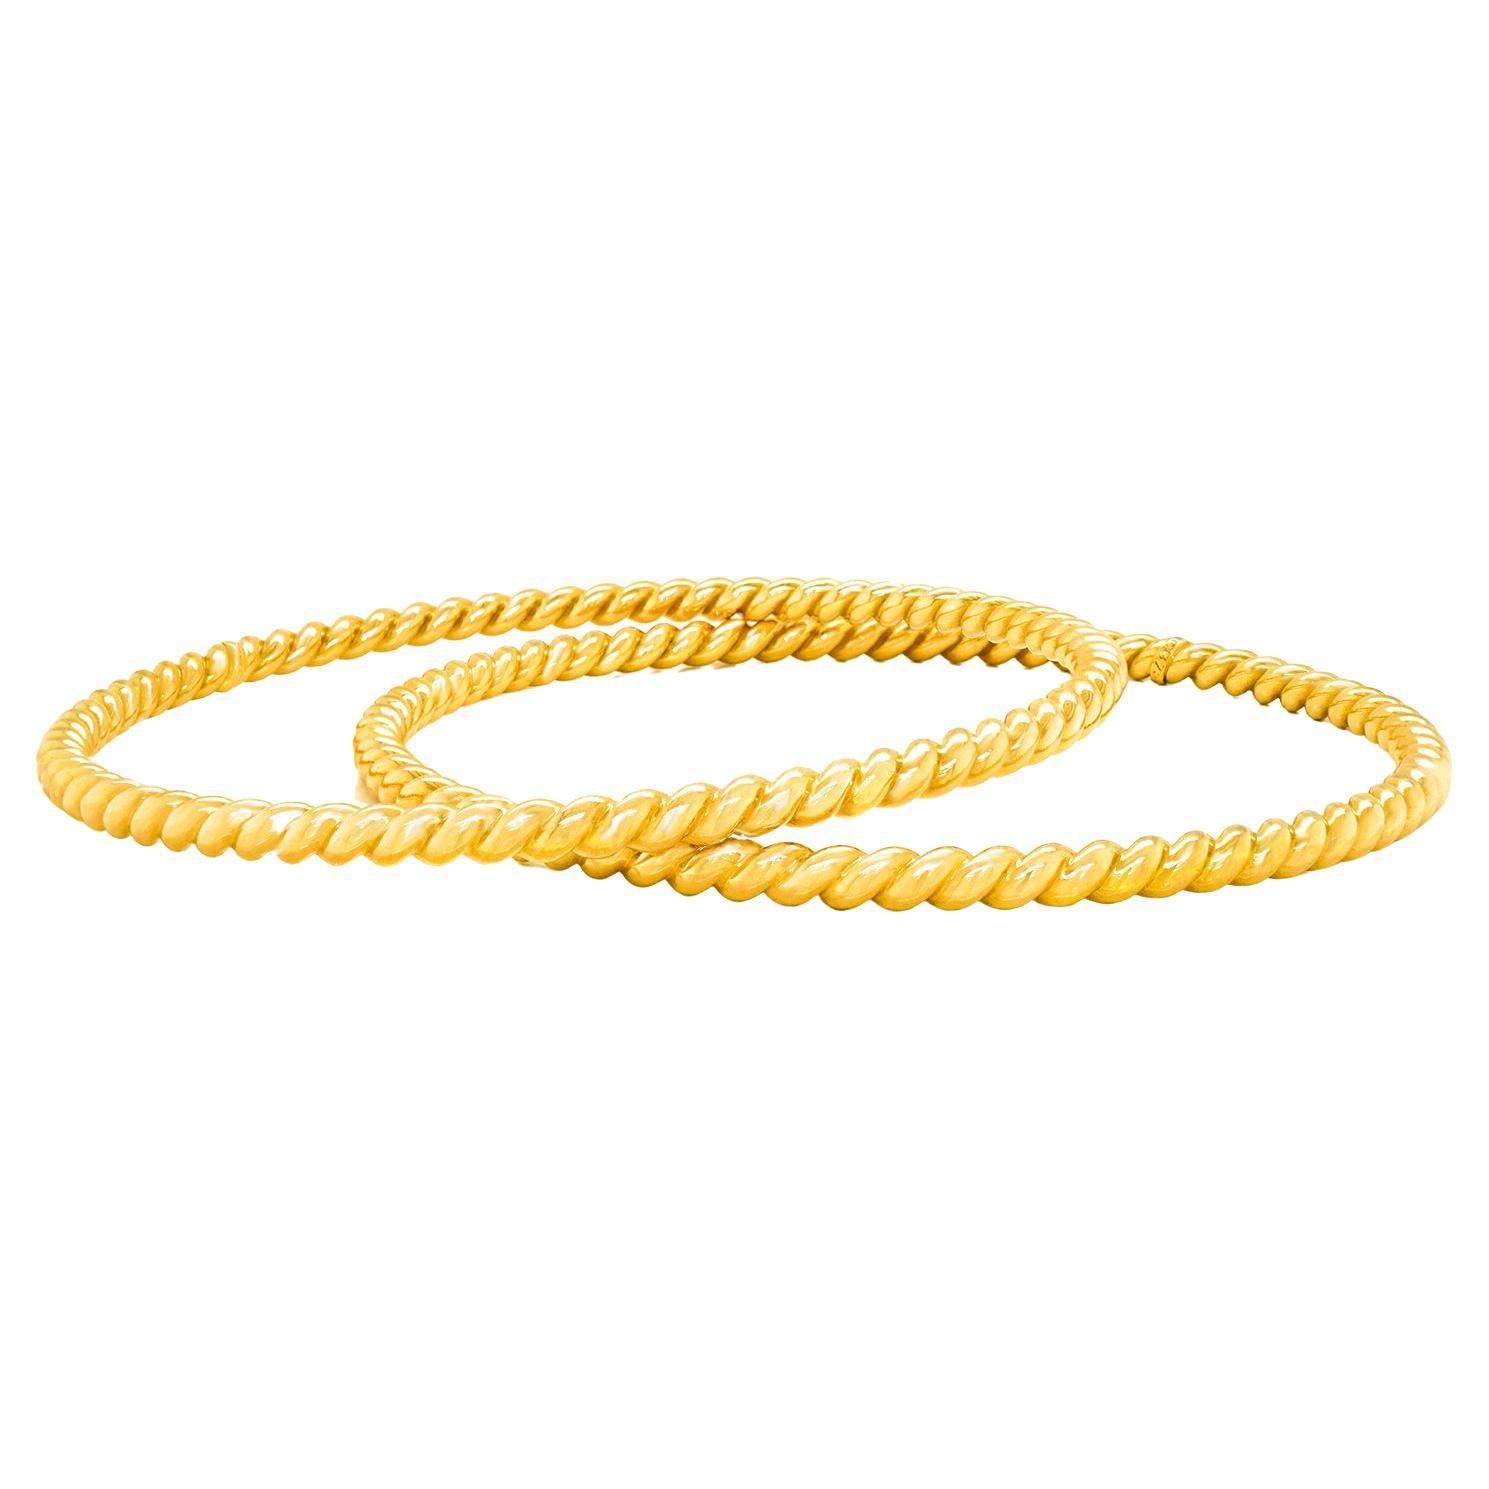 Pair of Bucherer Gold Cable Twist Bangles